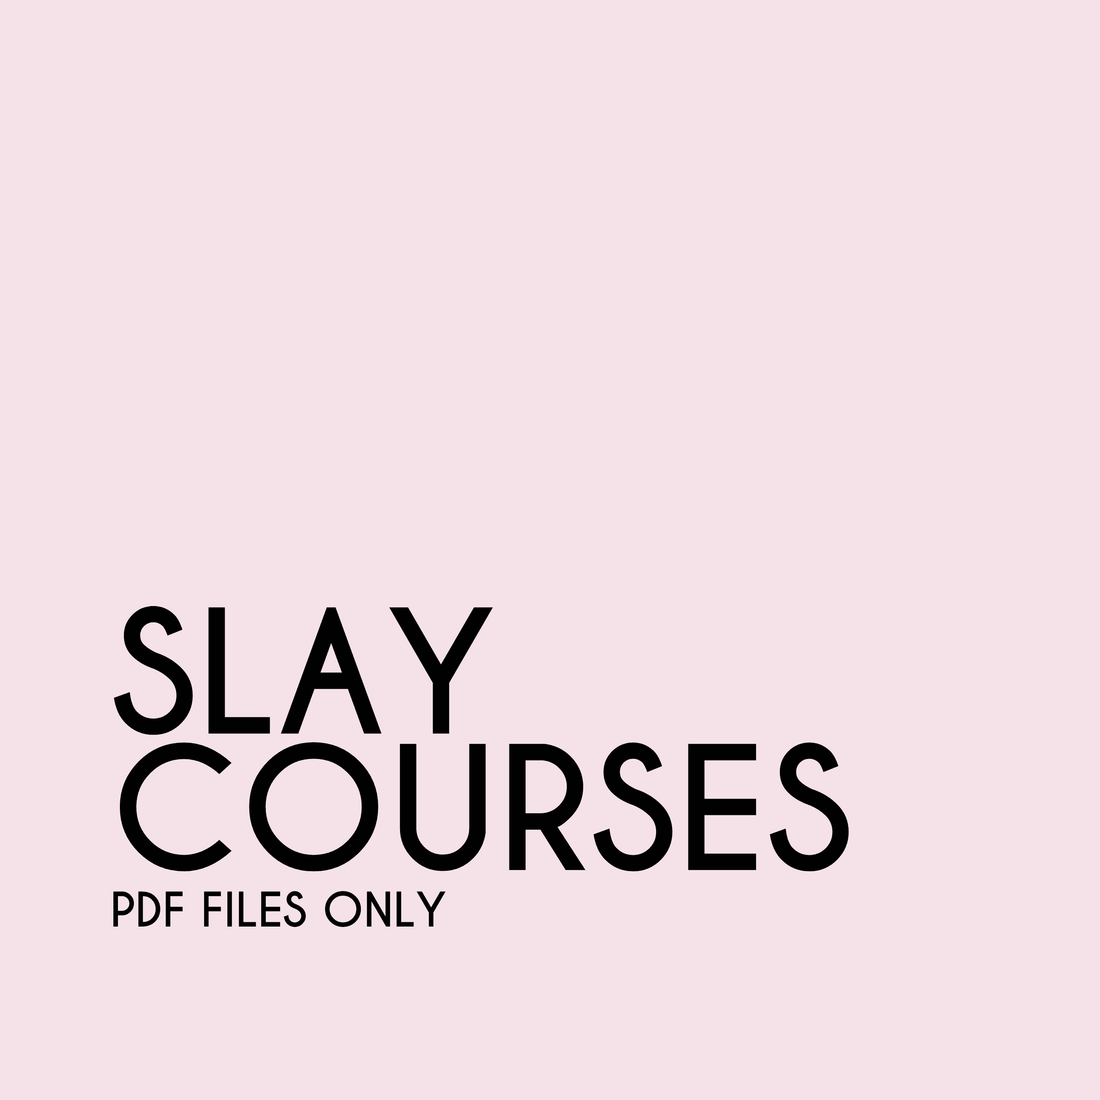 SLAY COURSES IN PDFs ONLY